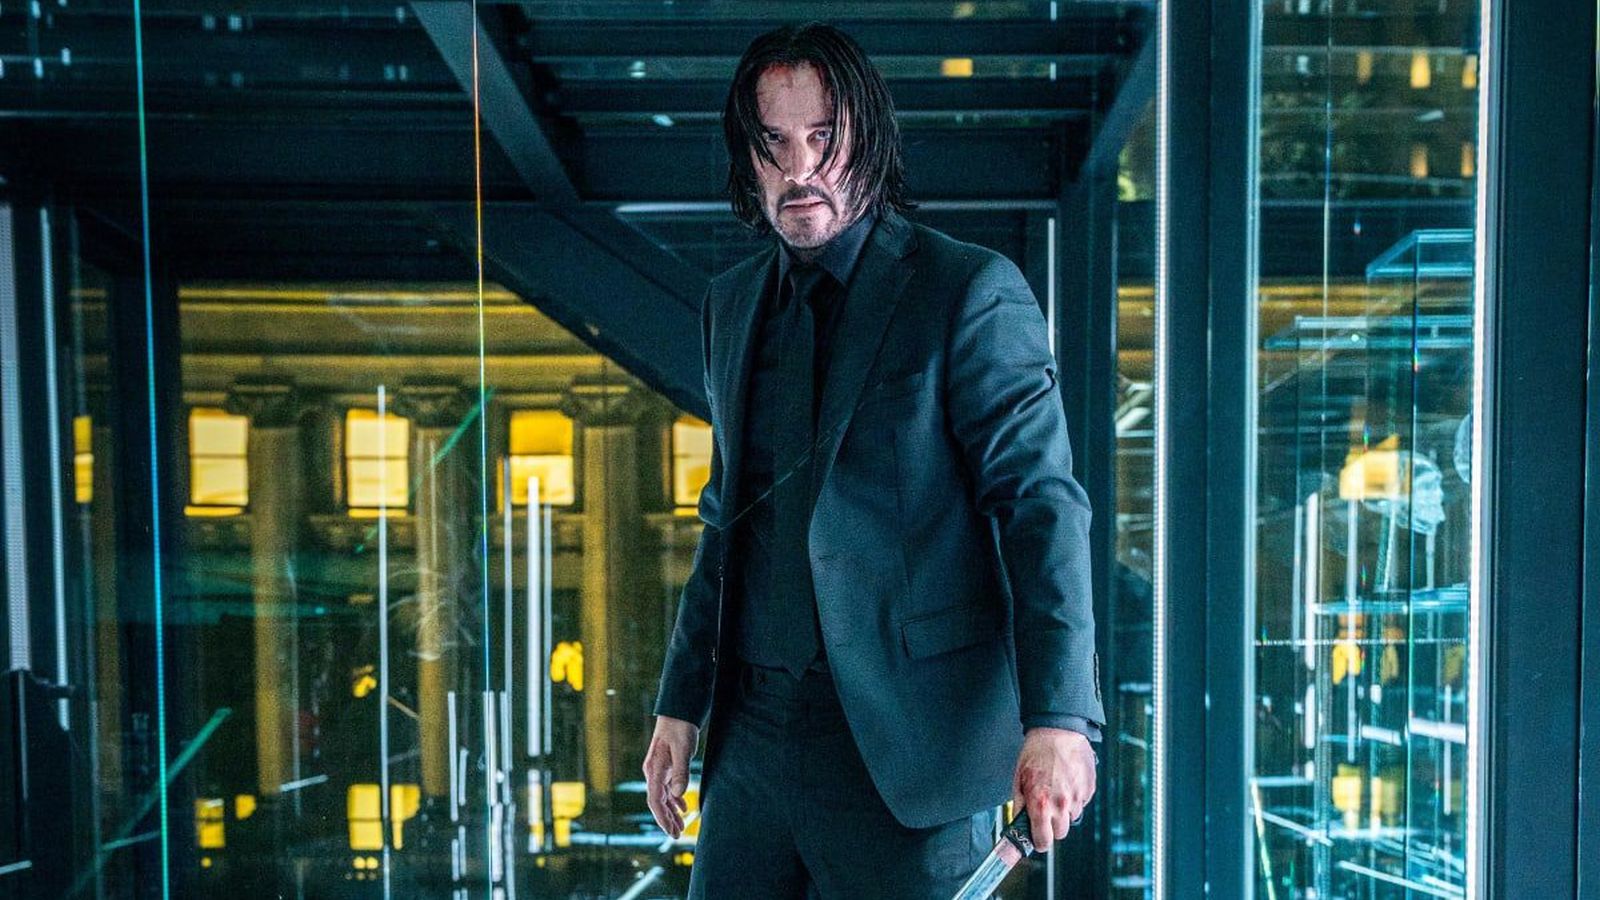 John Wick: Keanu Reeves ha "opened the head of a man" by mistake during an on-set accident